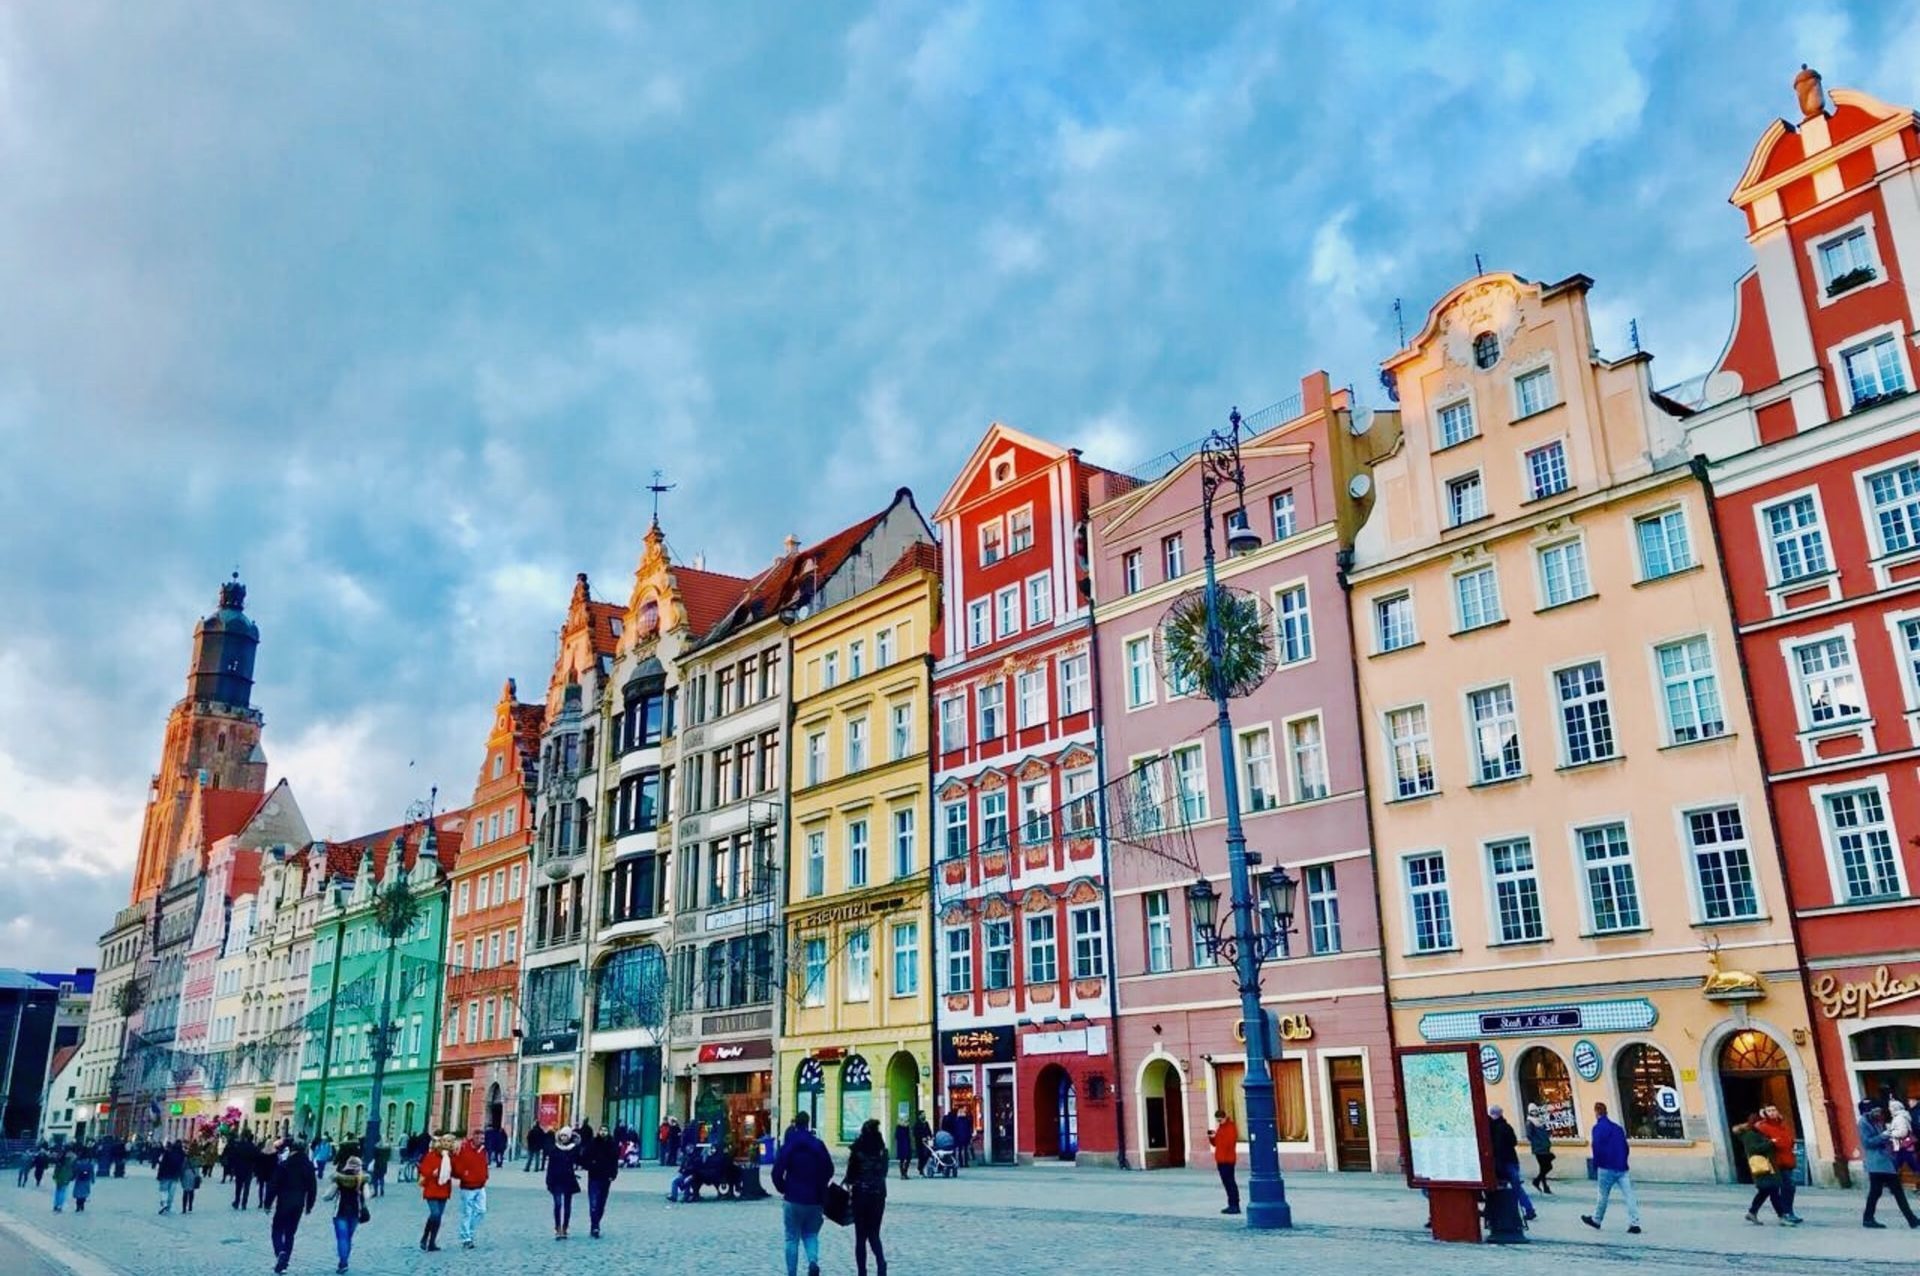 Colorful houses in Wroclaw, Poland